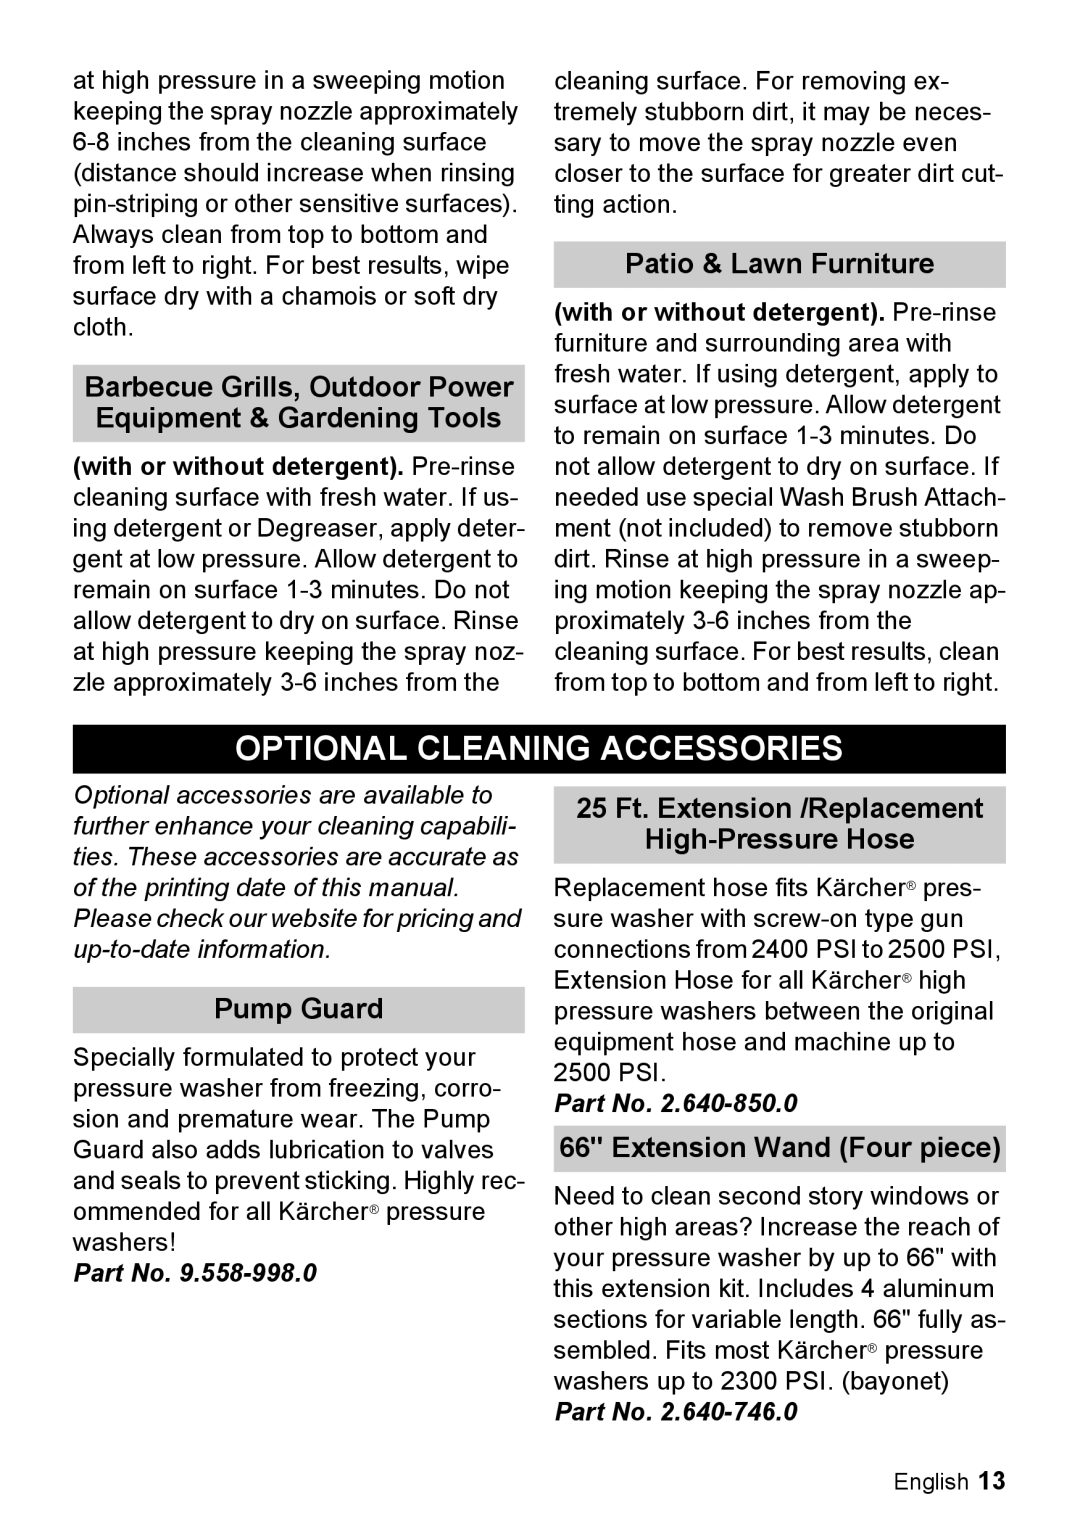 Karcher K 2.350 manual Optional Cleaning Accessories, Patio & Lawn Furniture, Pump Guard, Extension Wand Four piece 